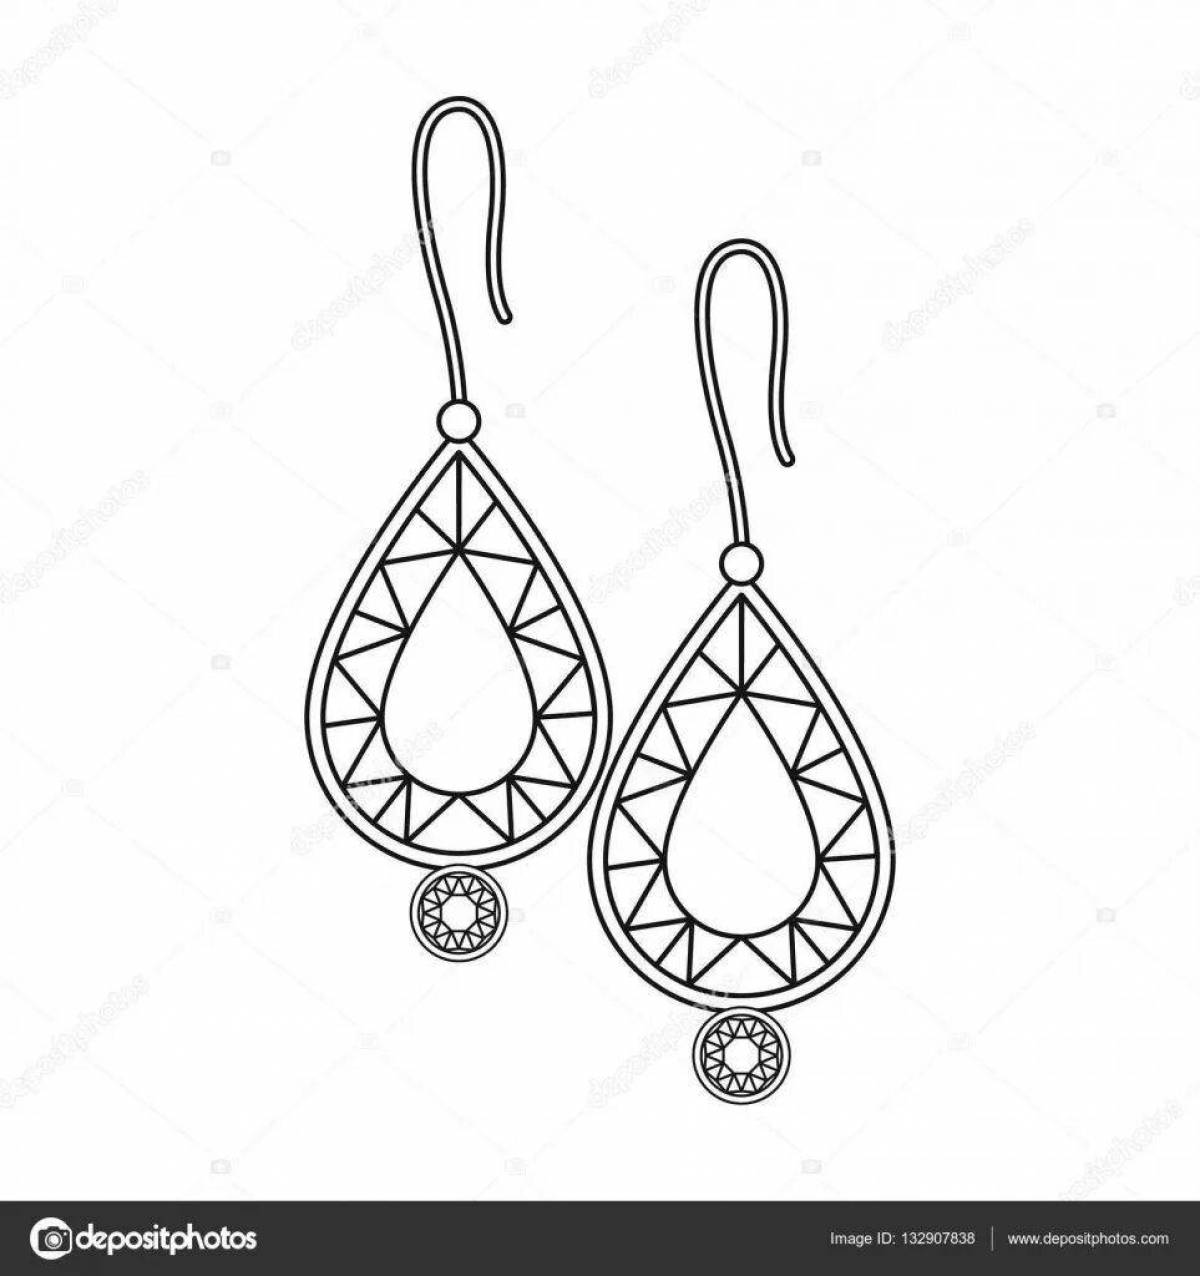 Playful Earring Coloring Page for Toddlers